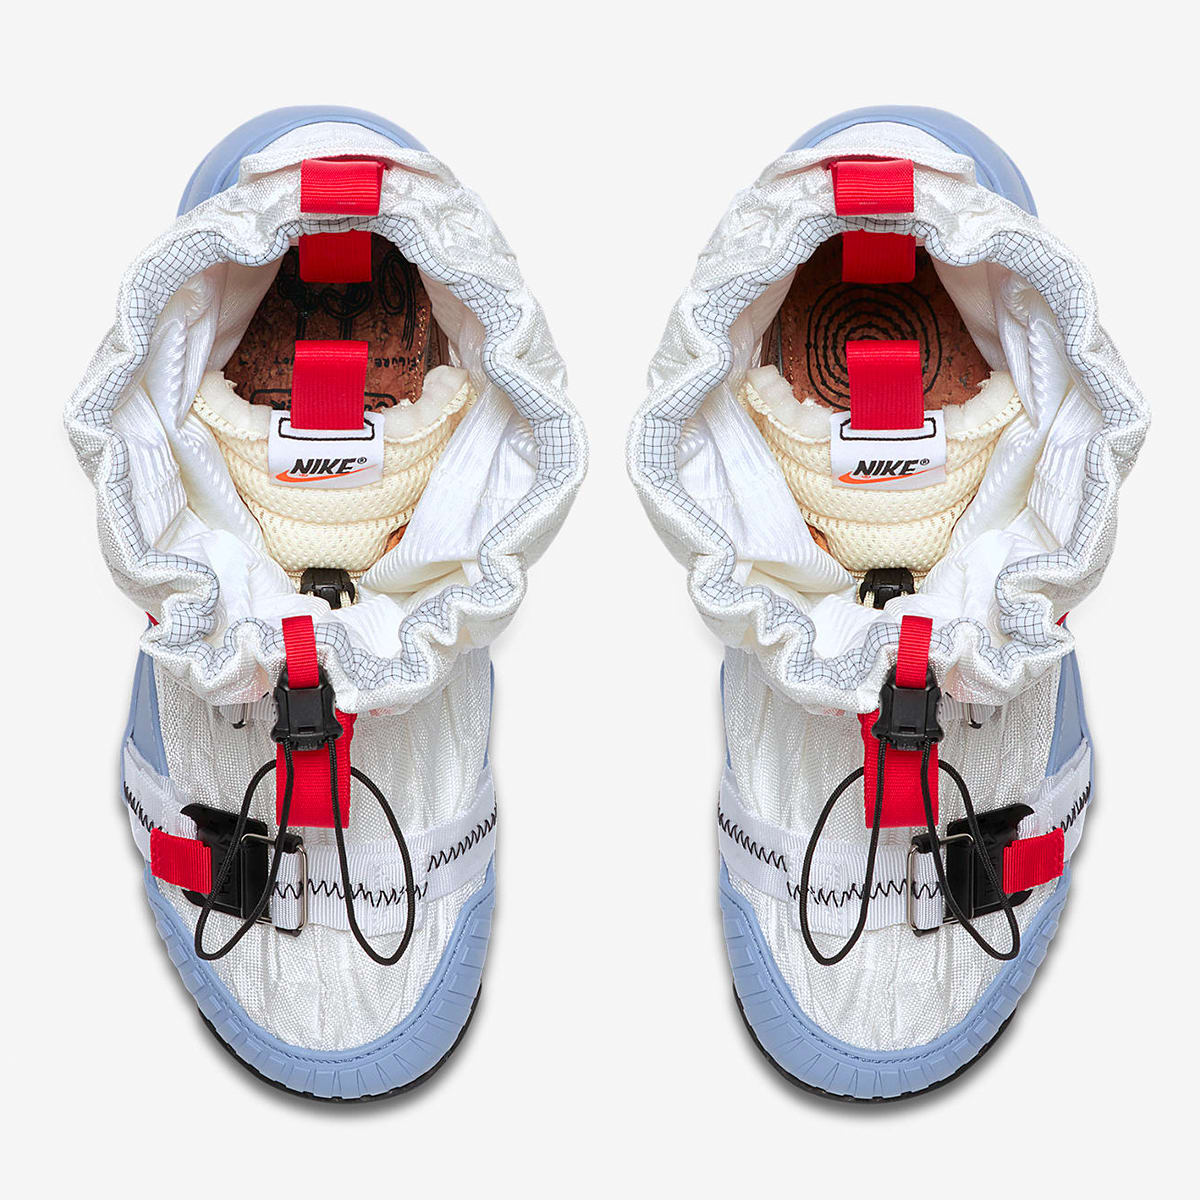 Nike Mars Yard Overshoe (White, Cobalt & Sport Red) | END. Launches